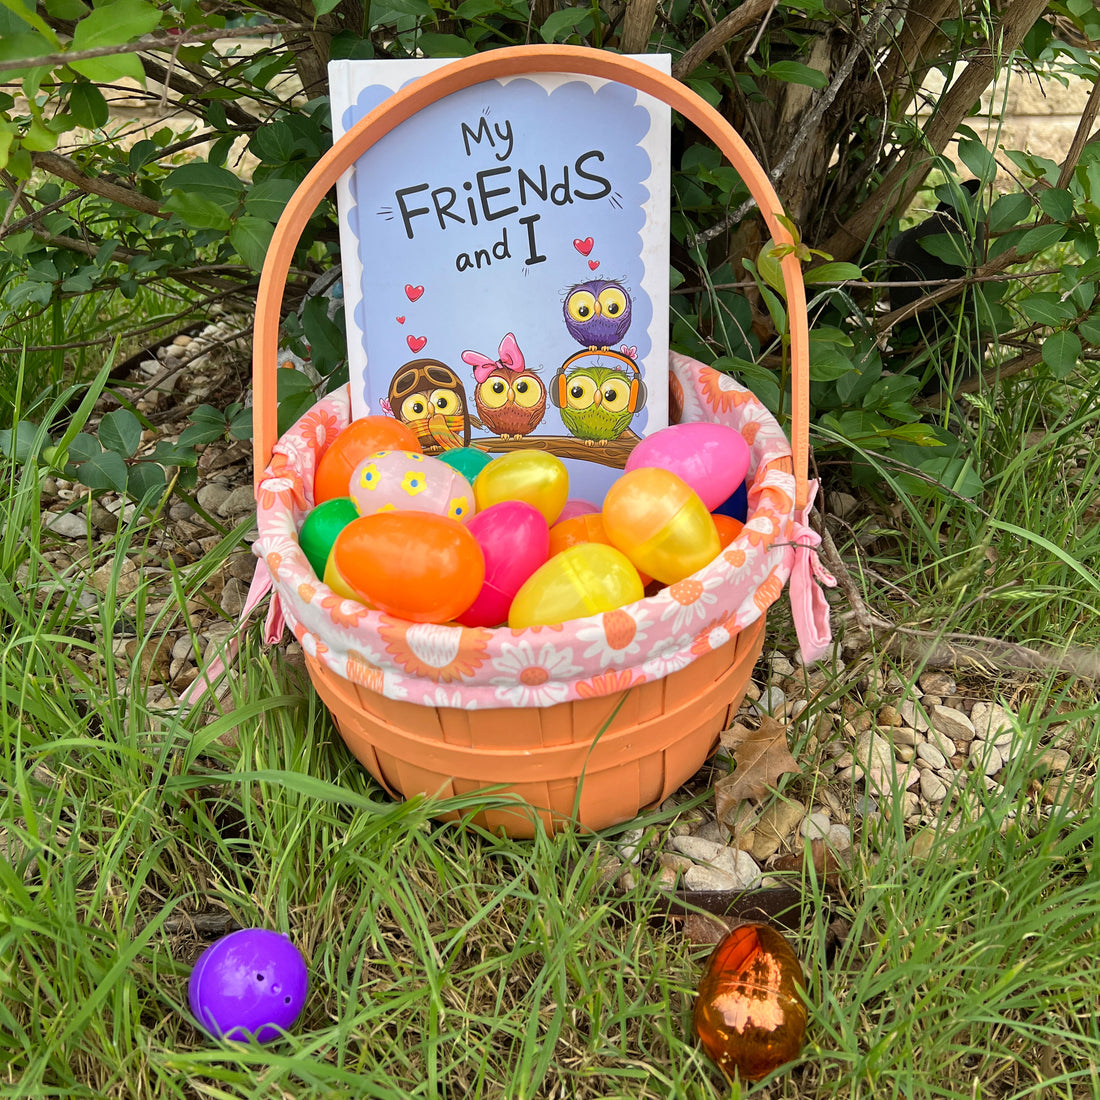 11 Egg-citing Easter Traditions for Families with Kids